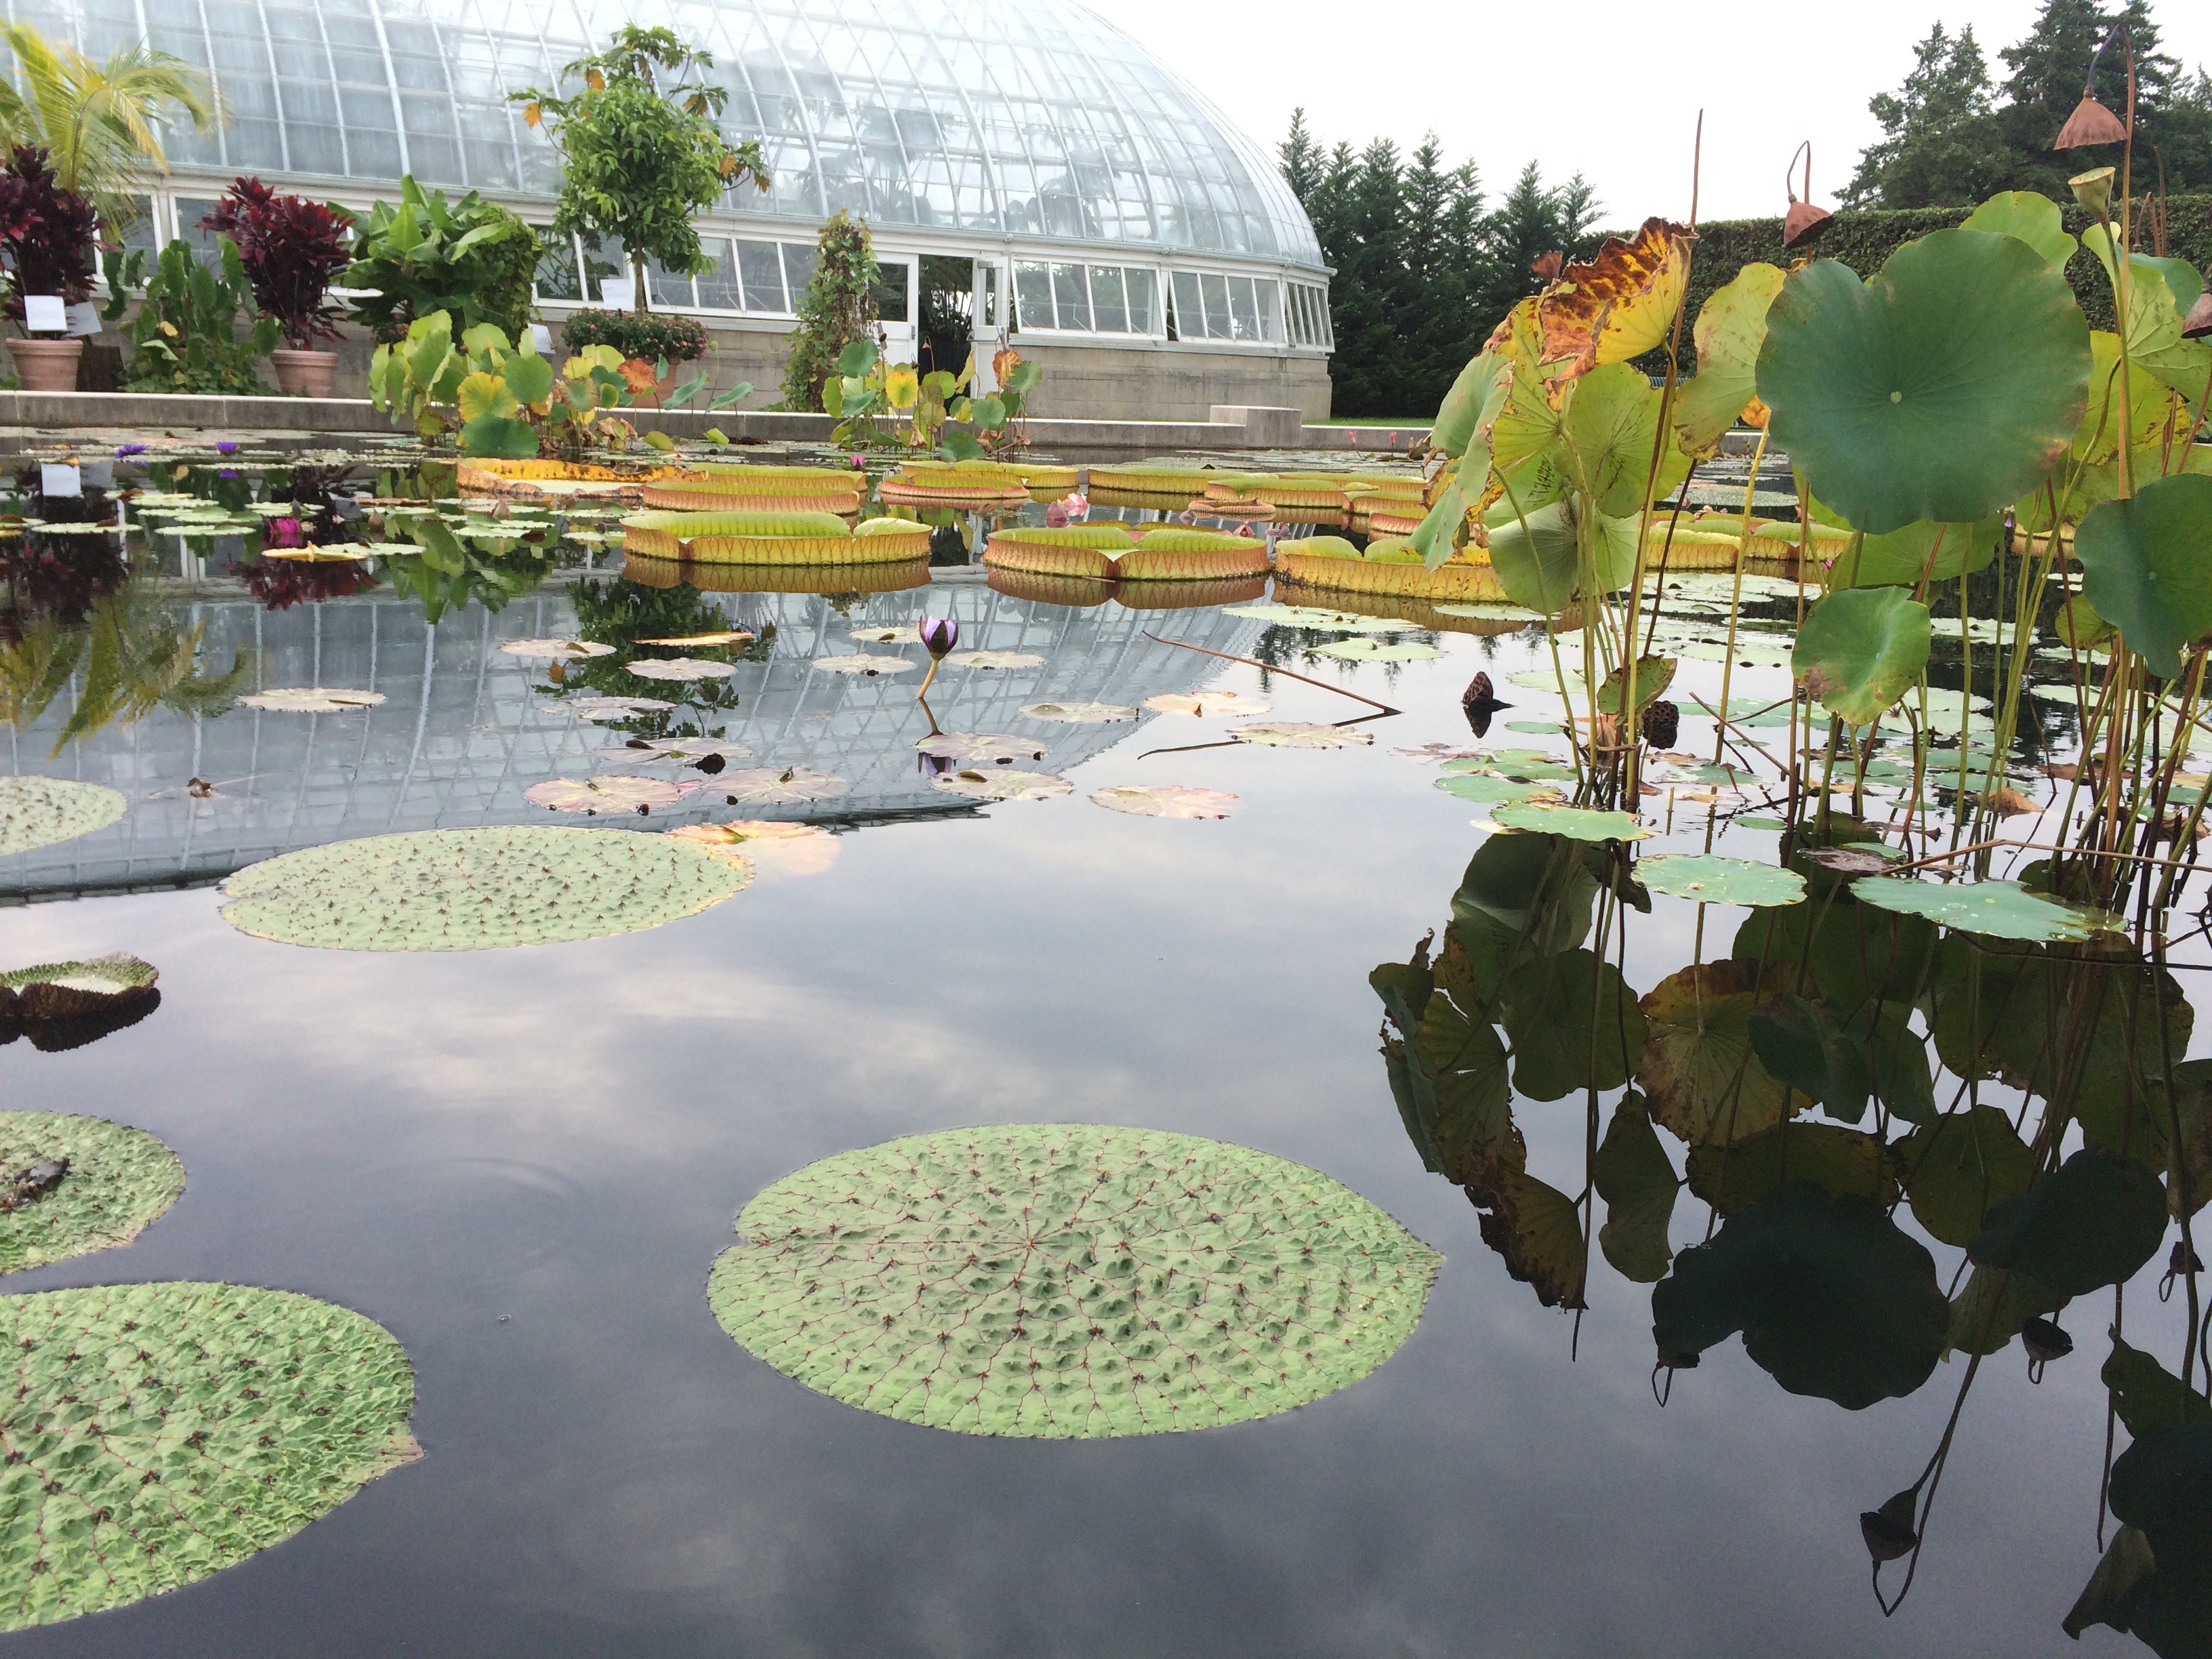 Photo of small water lily pads in foreground, large lily pads in mid-ground, and a large glasshouse in the background.